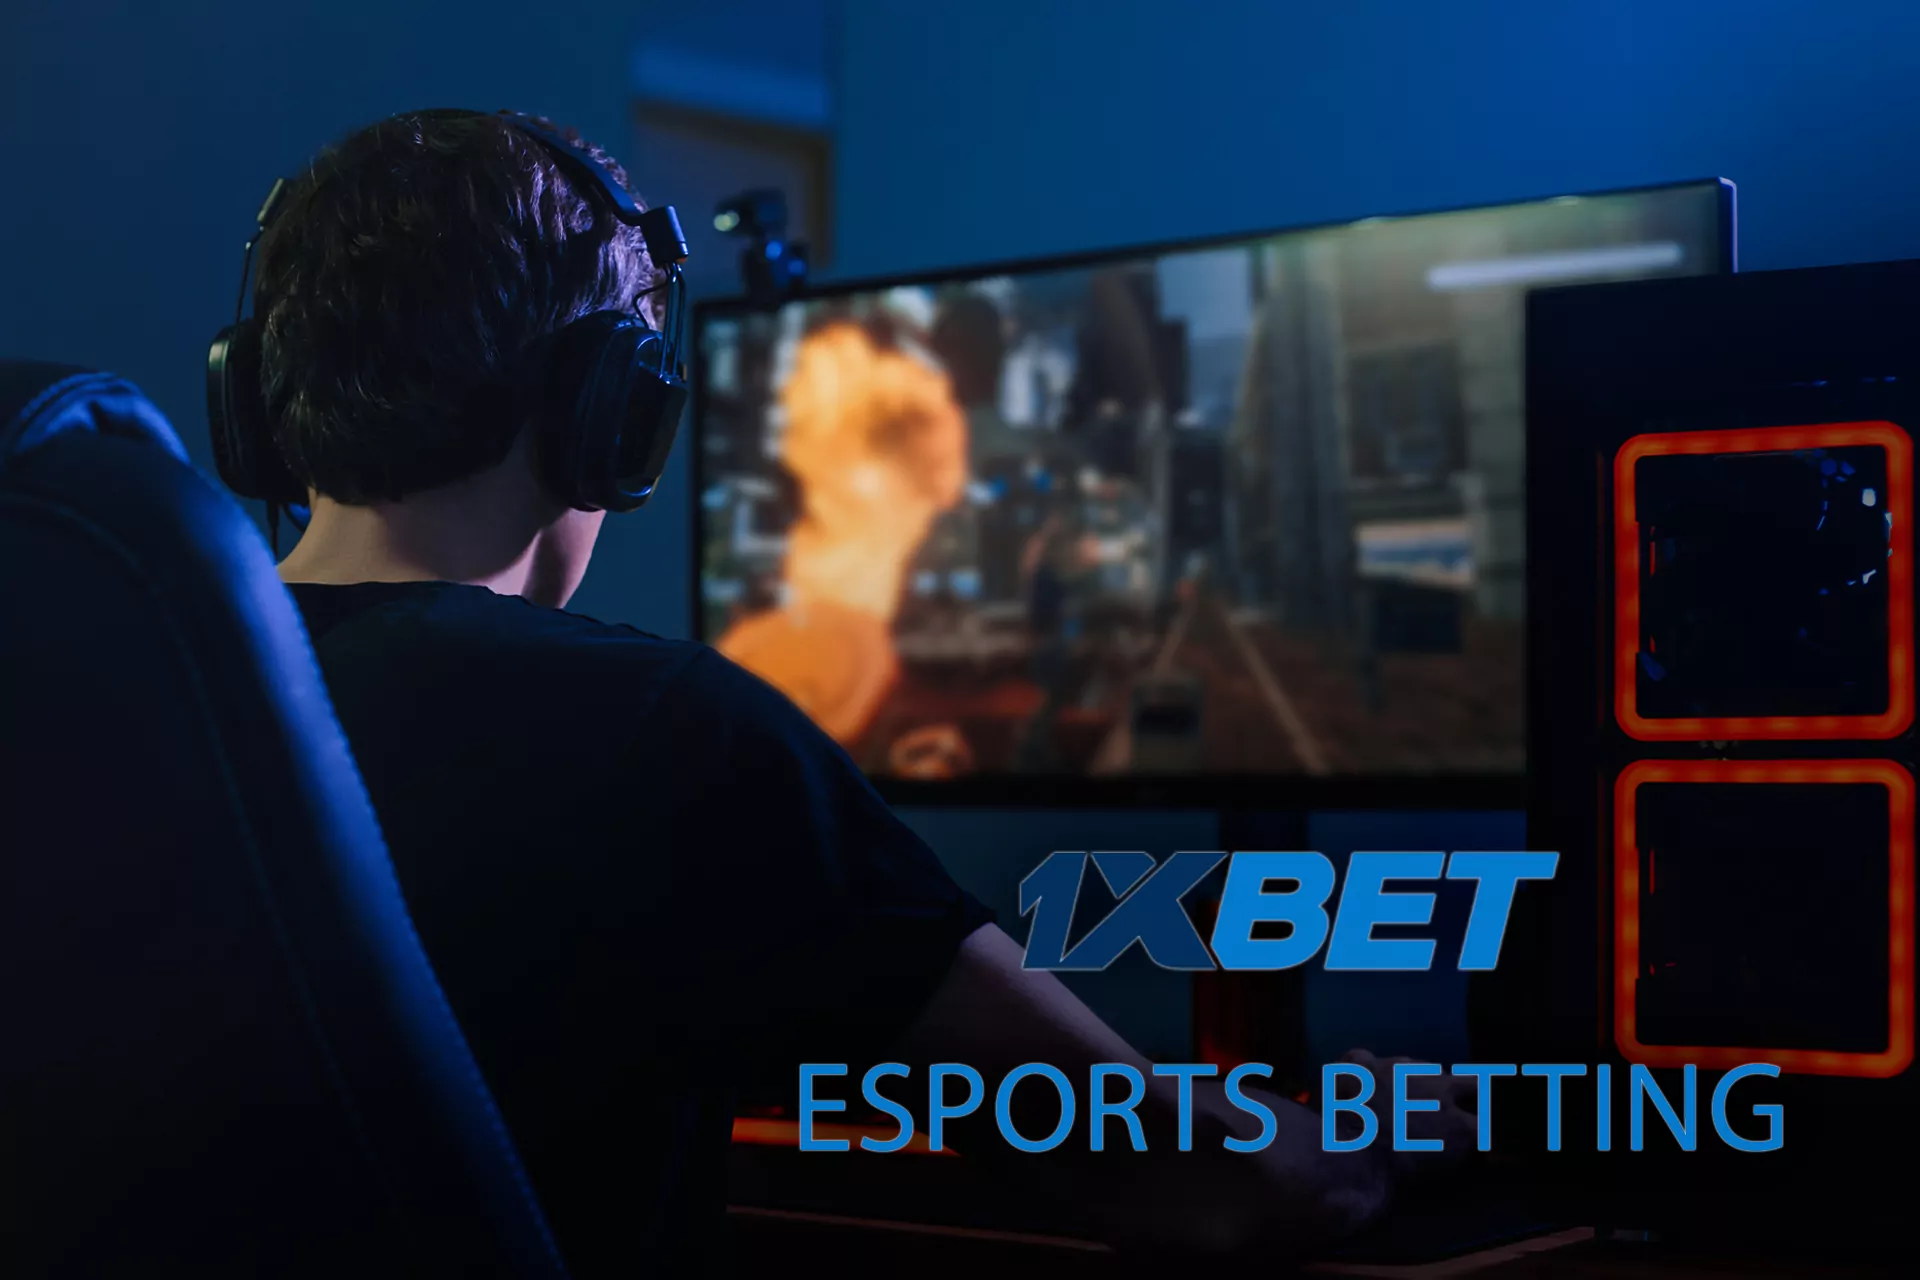 Players from India can bet on cyber sports on 1xBet.